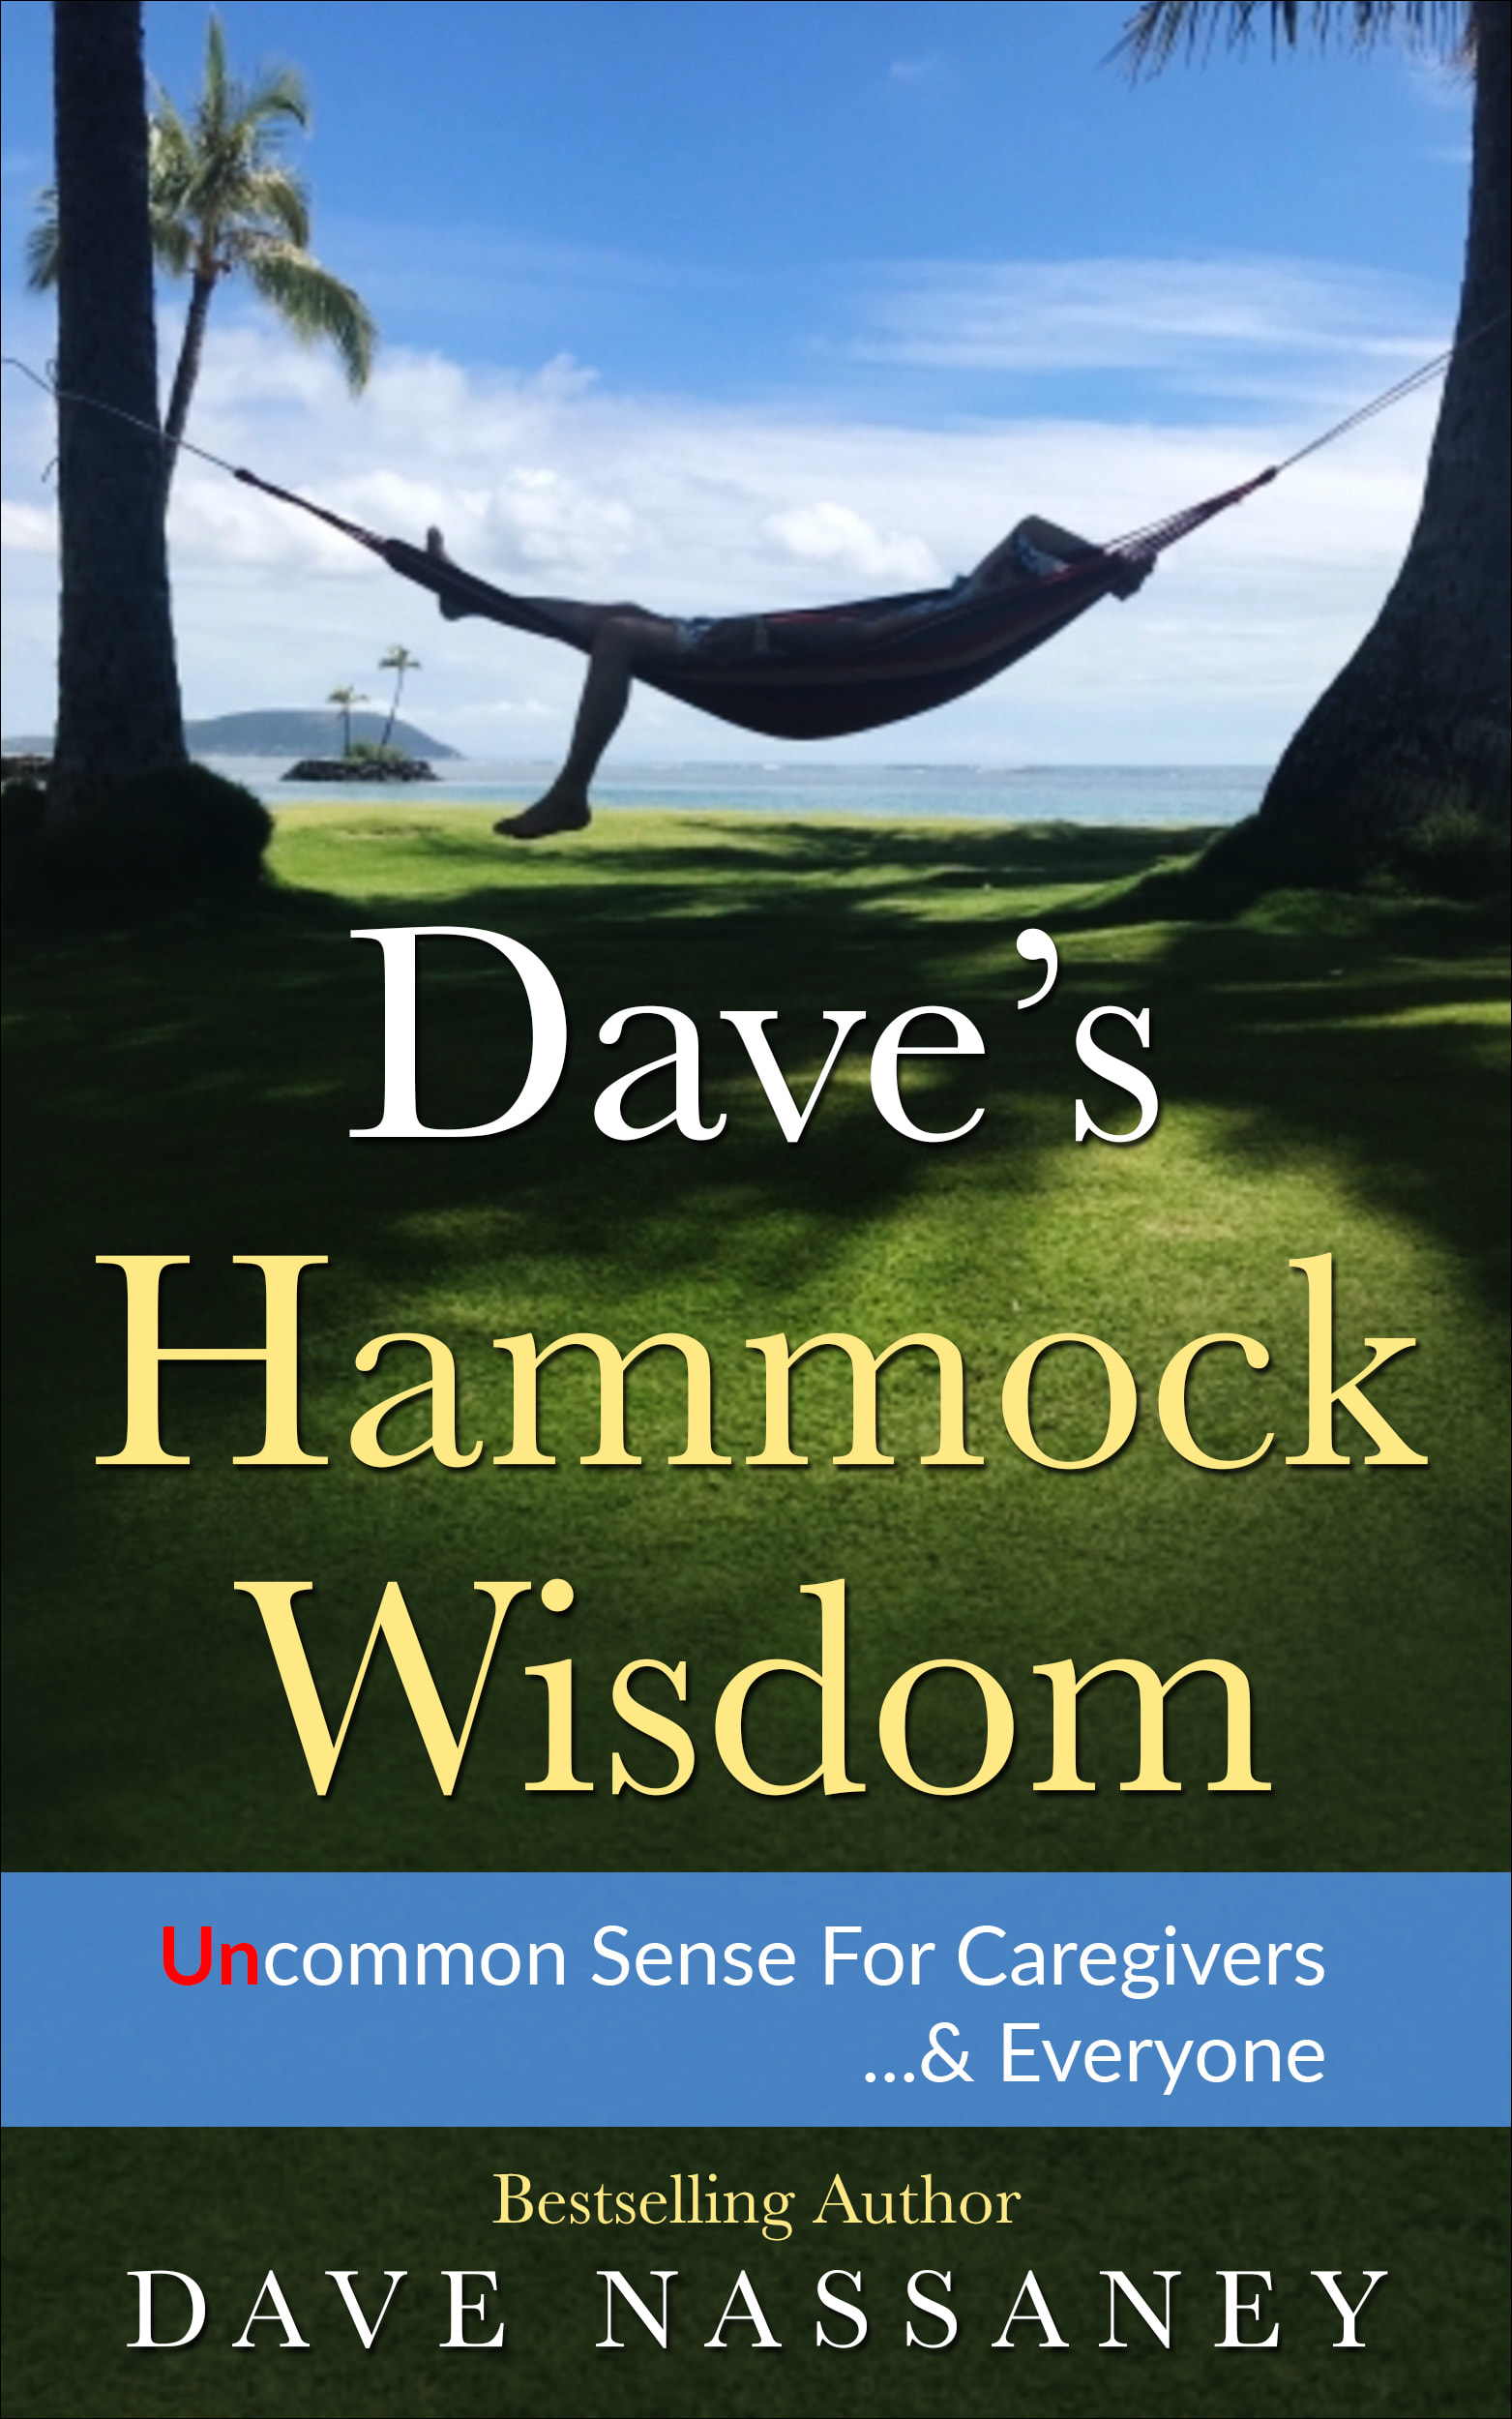 Dave Nassaney's new book, "Dave's Hammock Wisdom, UnCommon Sense for Caregivers ...& Everyone, Coming this year